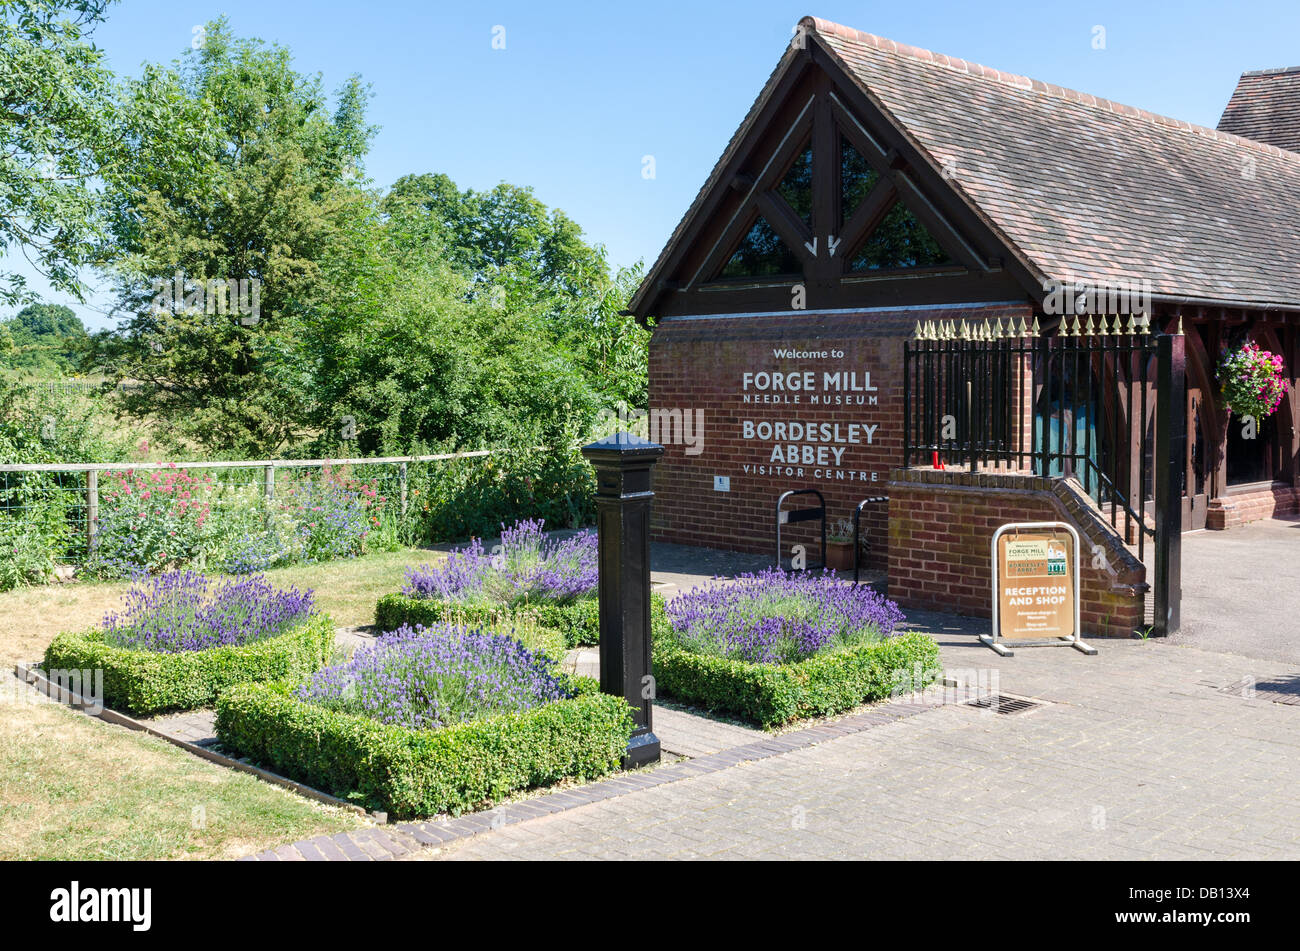 Entrance to Forge Mill Needle Museum and Bordesley Abbey visitor centre near Redditch in Worcestershire Stock Photo